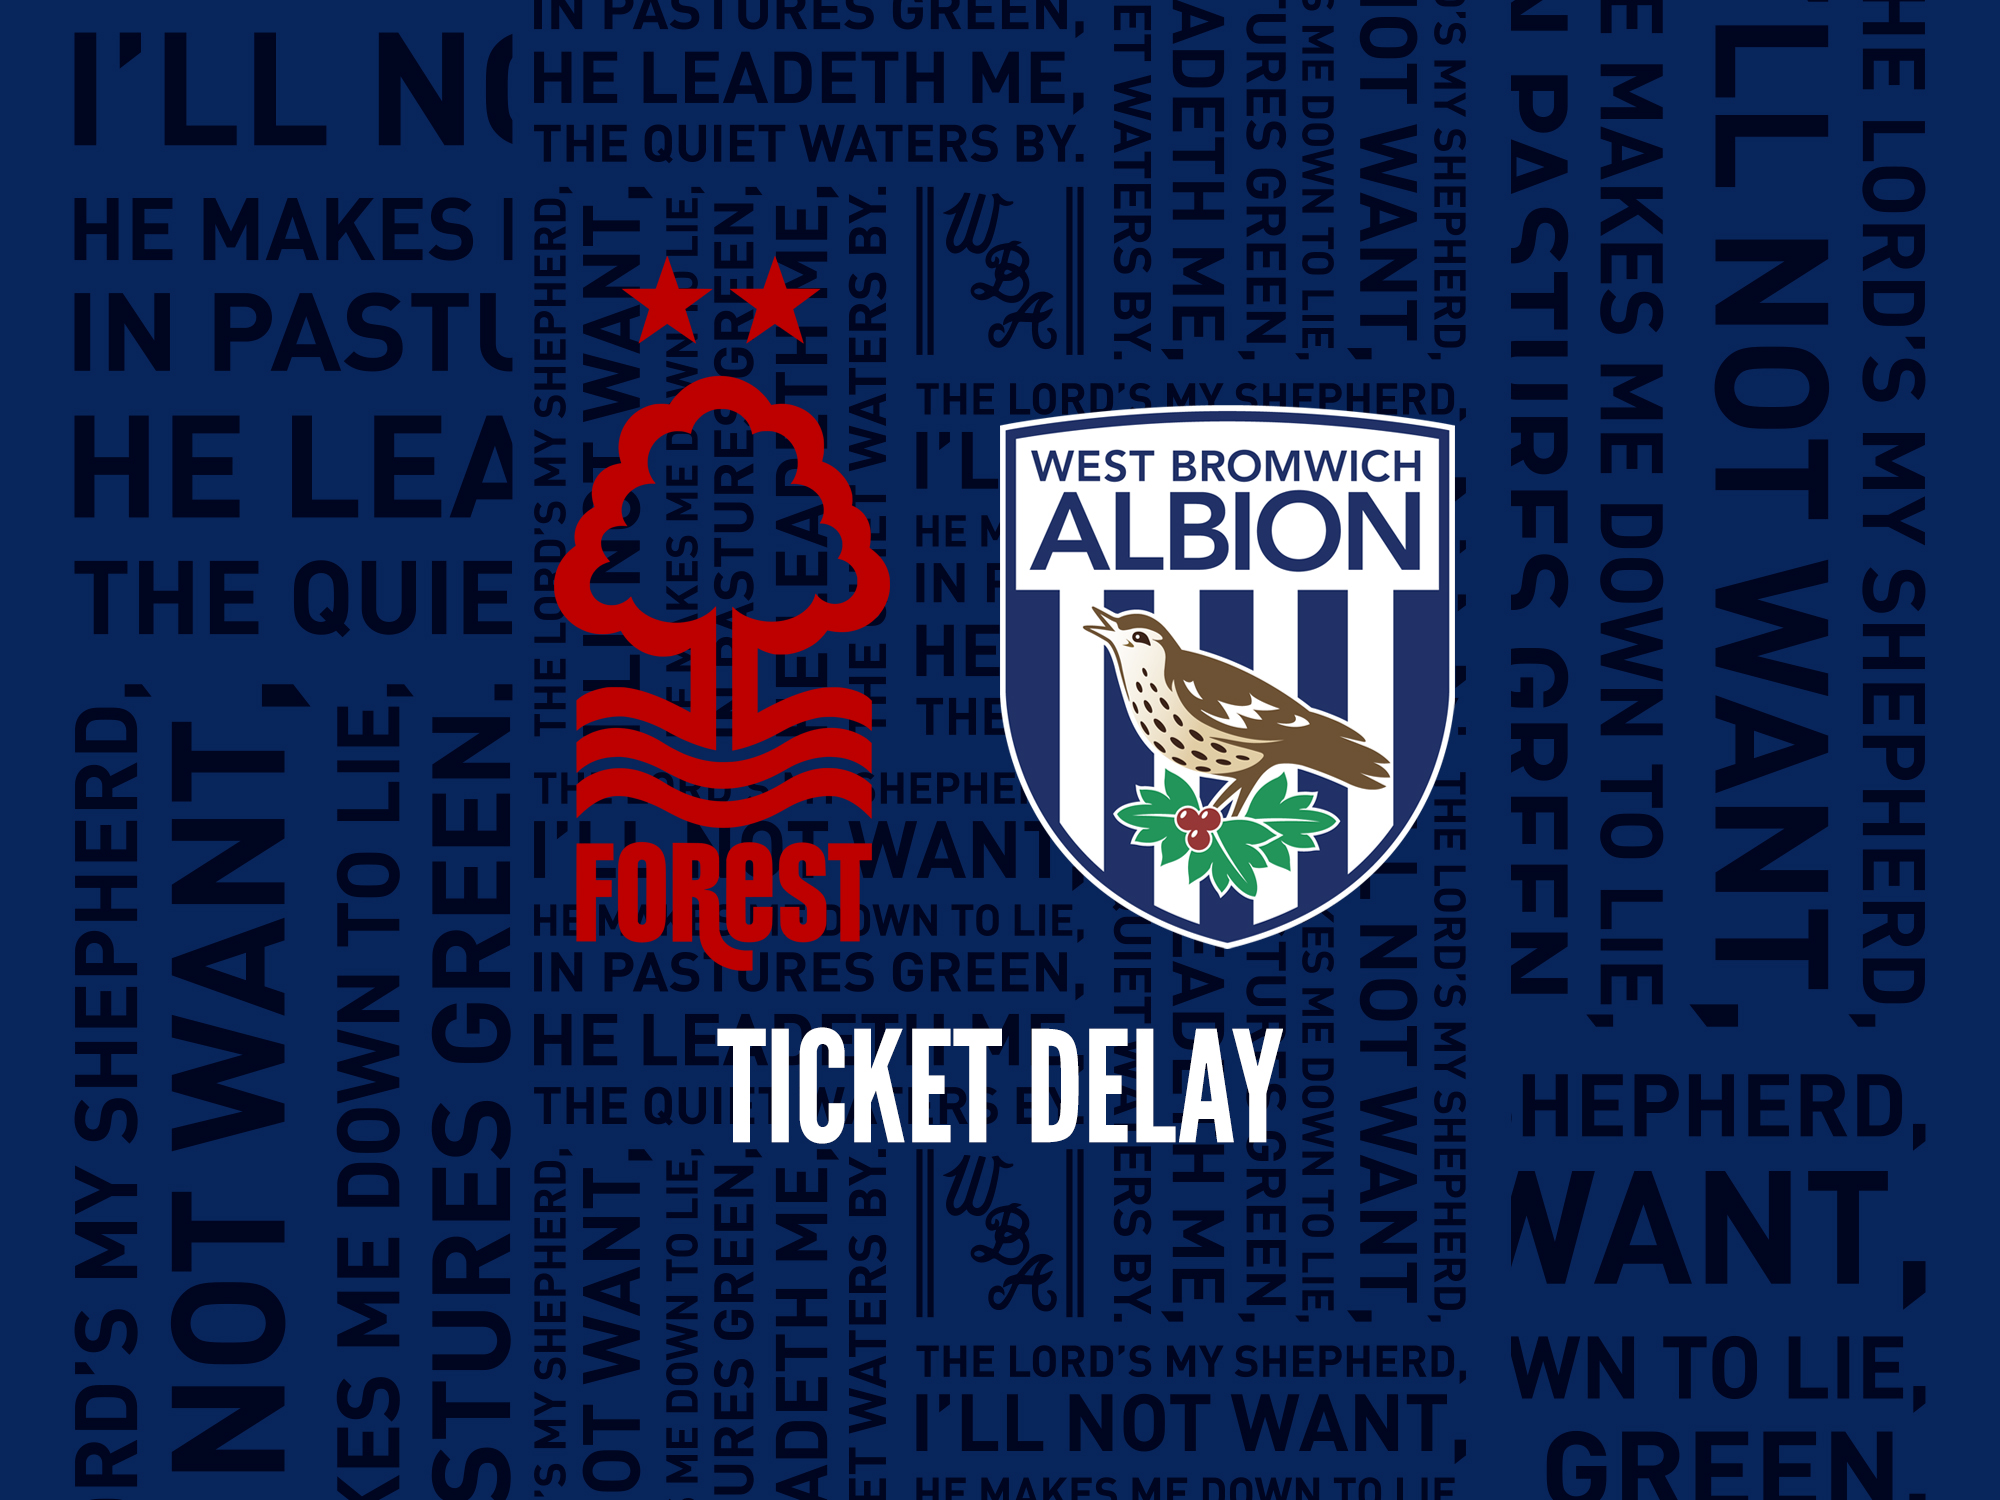 Tickets for Albion's trip to Forest have been delayed